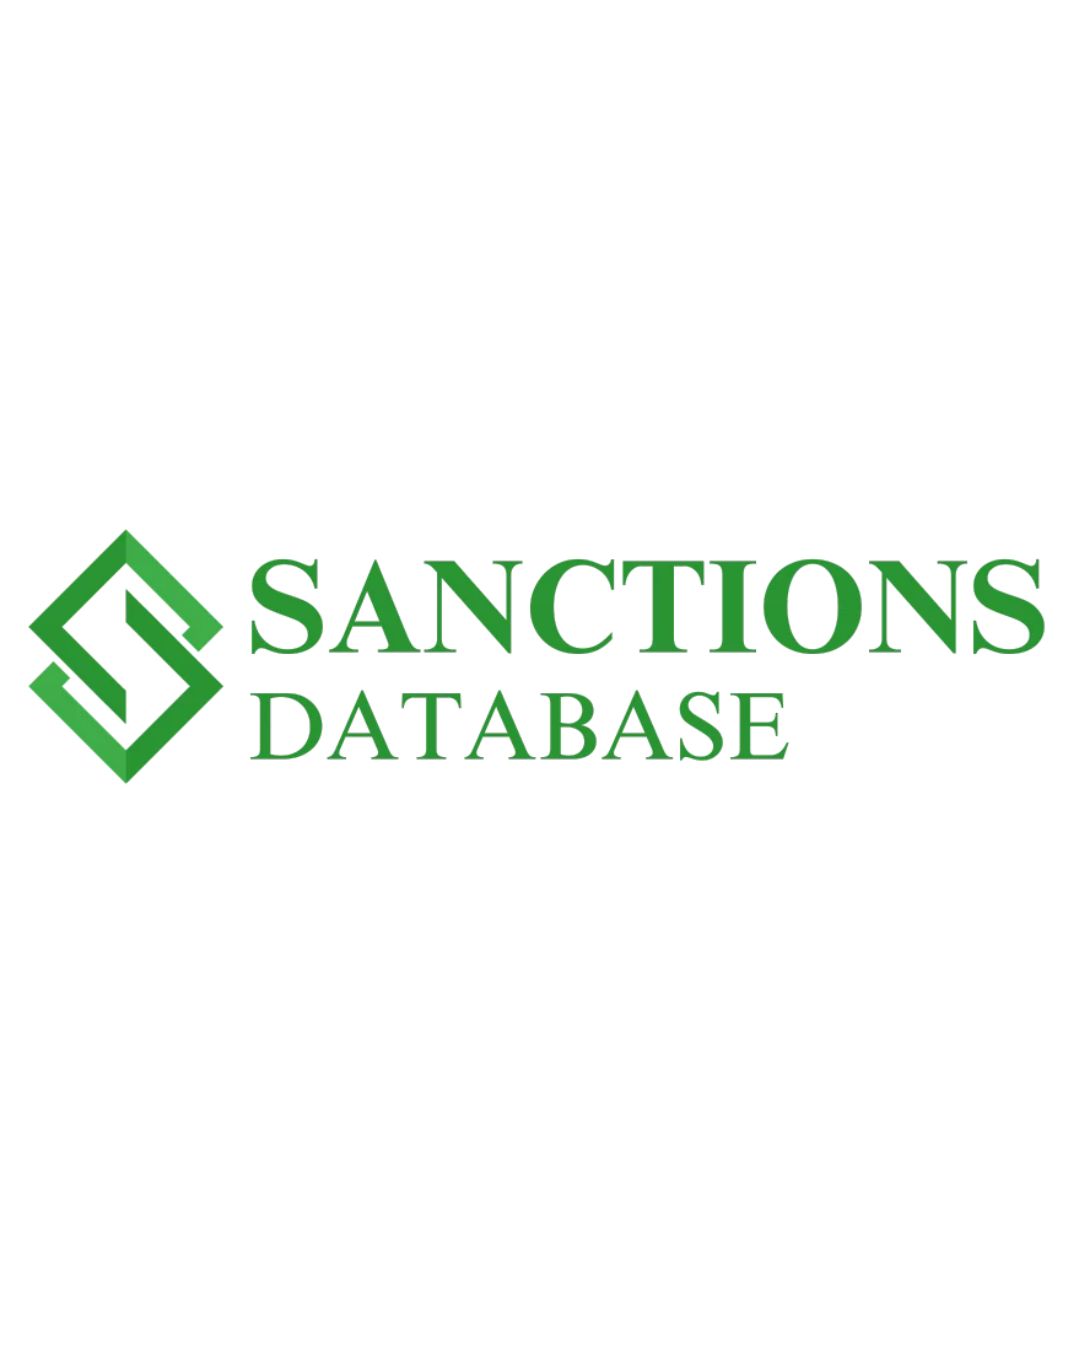 Why is it important to have access to a Global Sanctions Lis - California - Bakersfield ID1529313